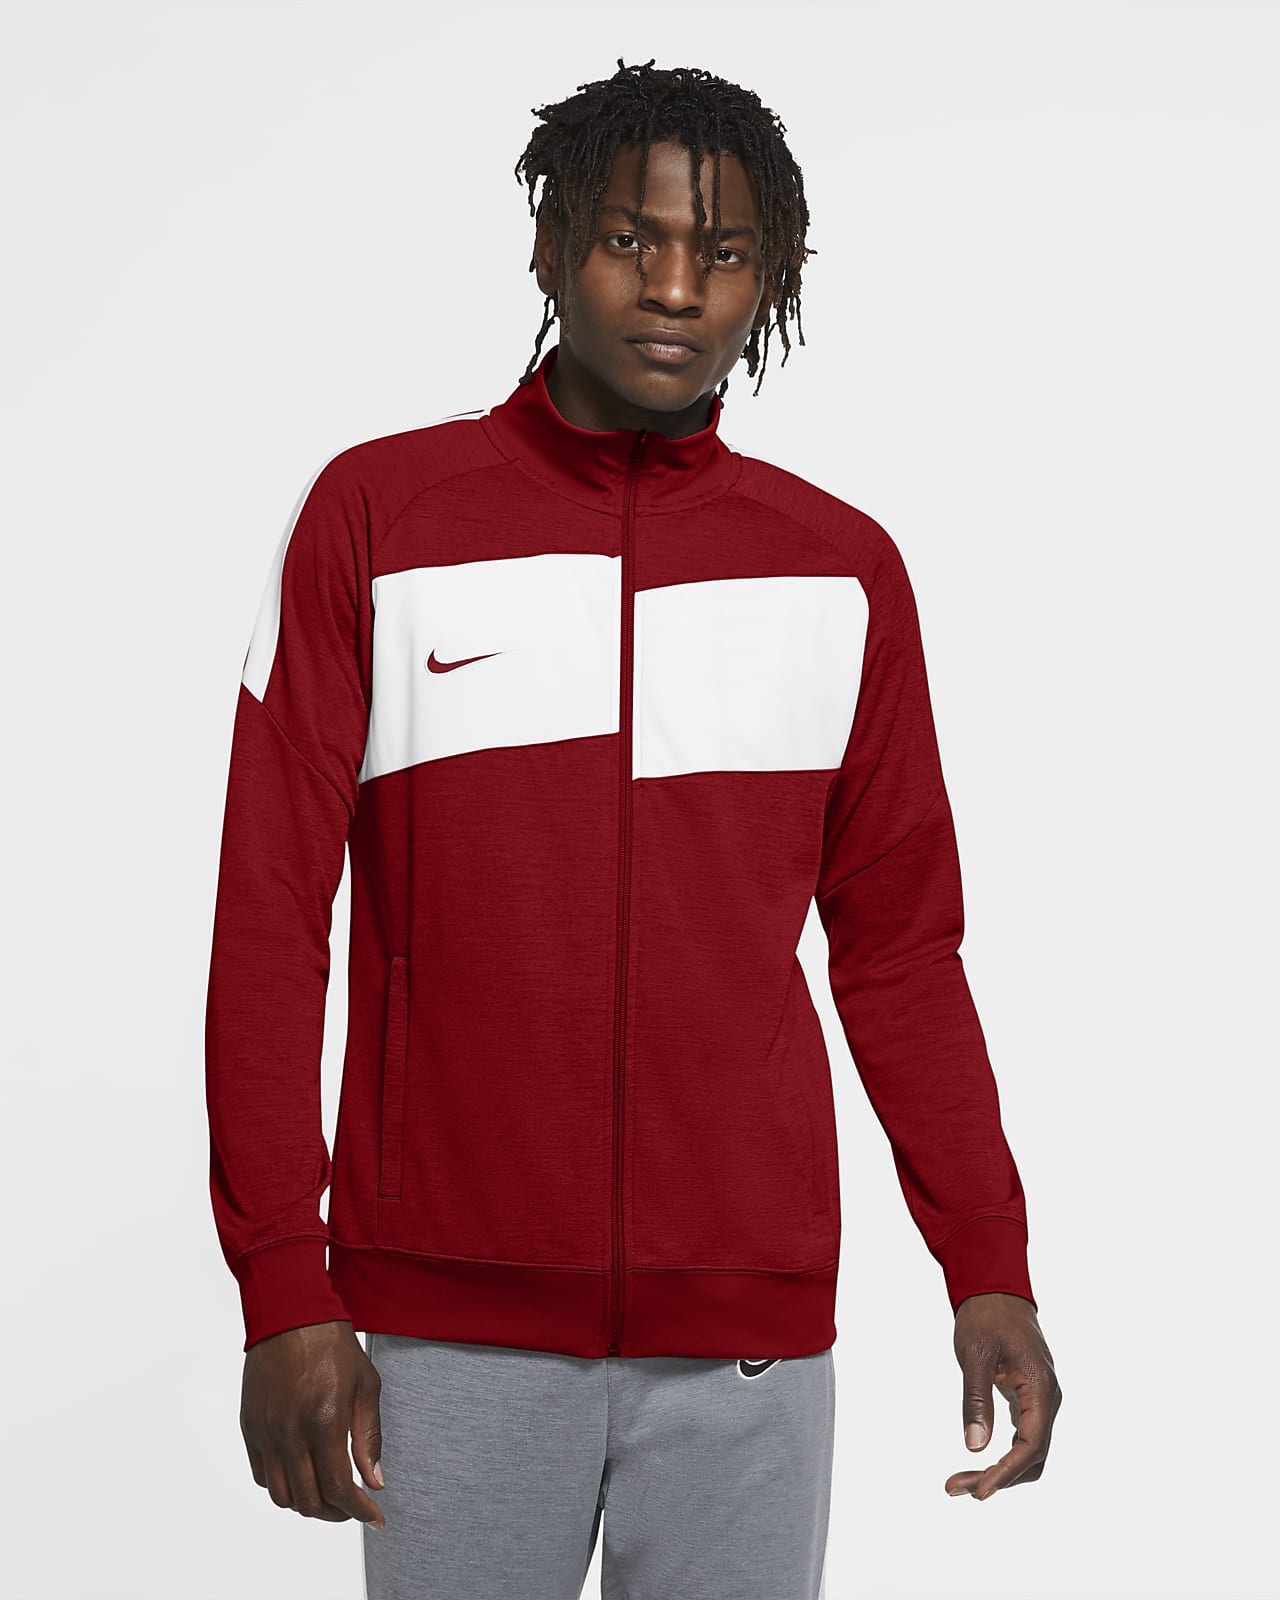 nike jacket in red